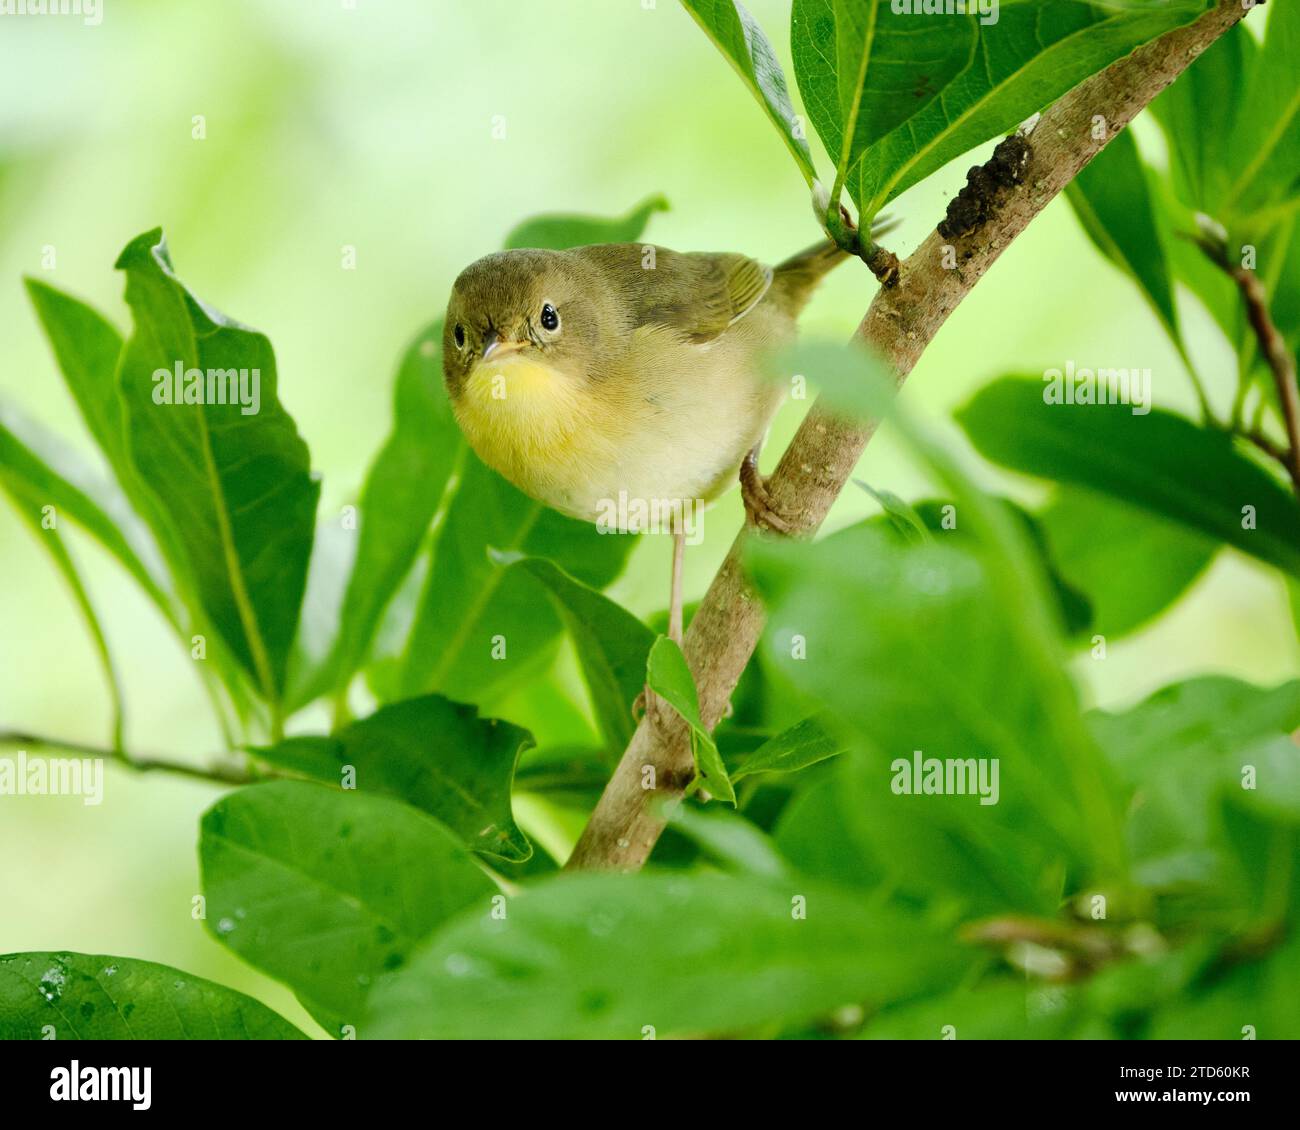 Common Yellowthroat, Geothlypis trichas , perched on branch looking at camera Stock Photo